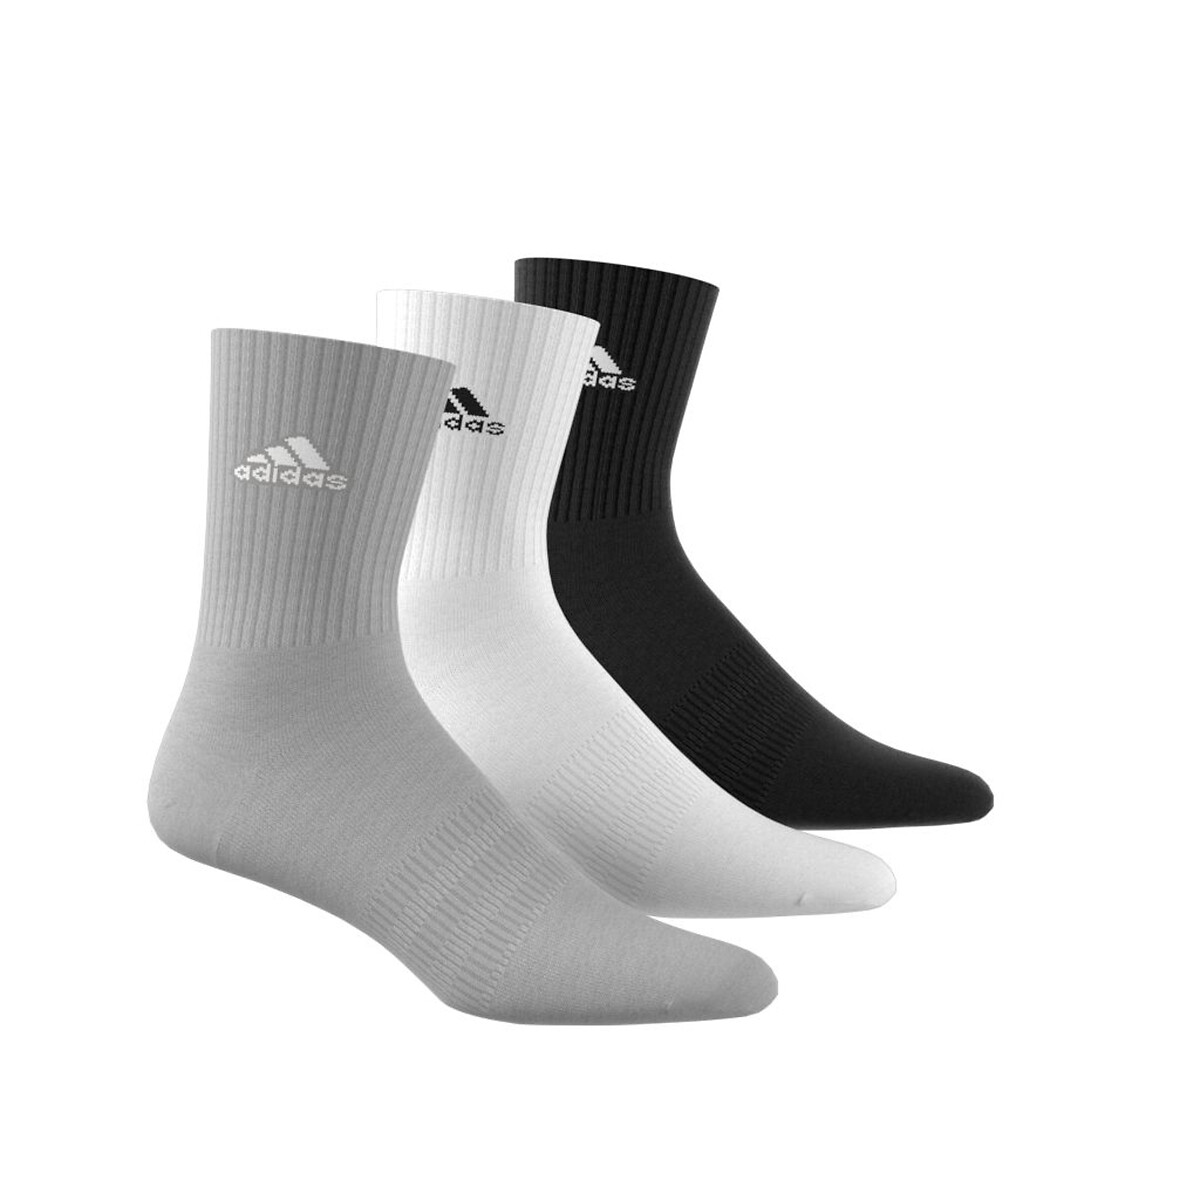 Pack of 3 pairs of crew socks in cotton mix, black + white + grey ...